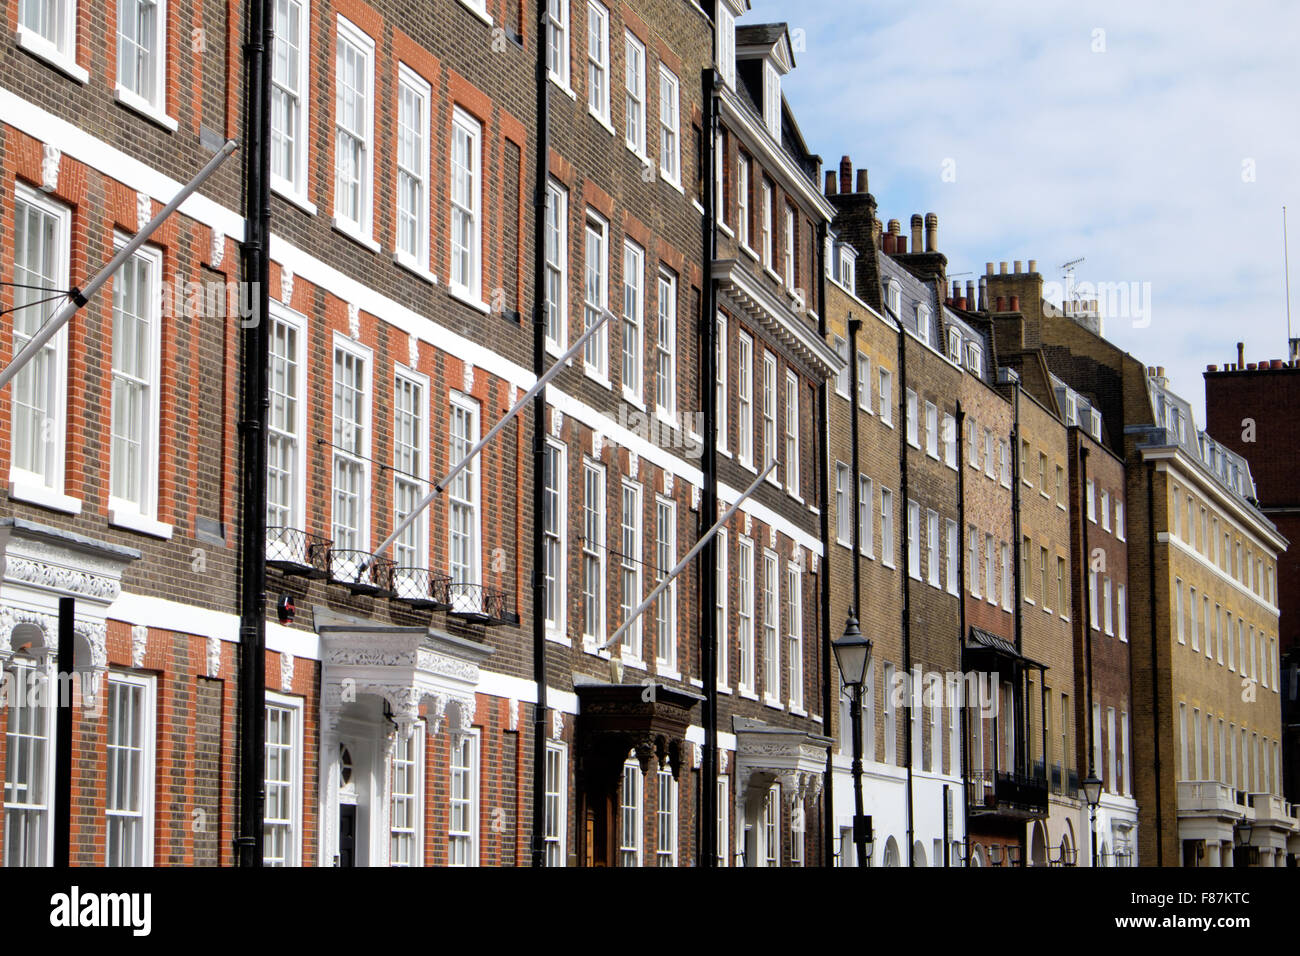 Typical London rowhouses line a street in Central London Stock Photo